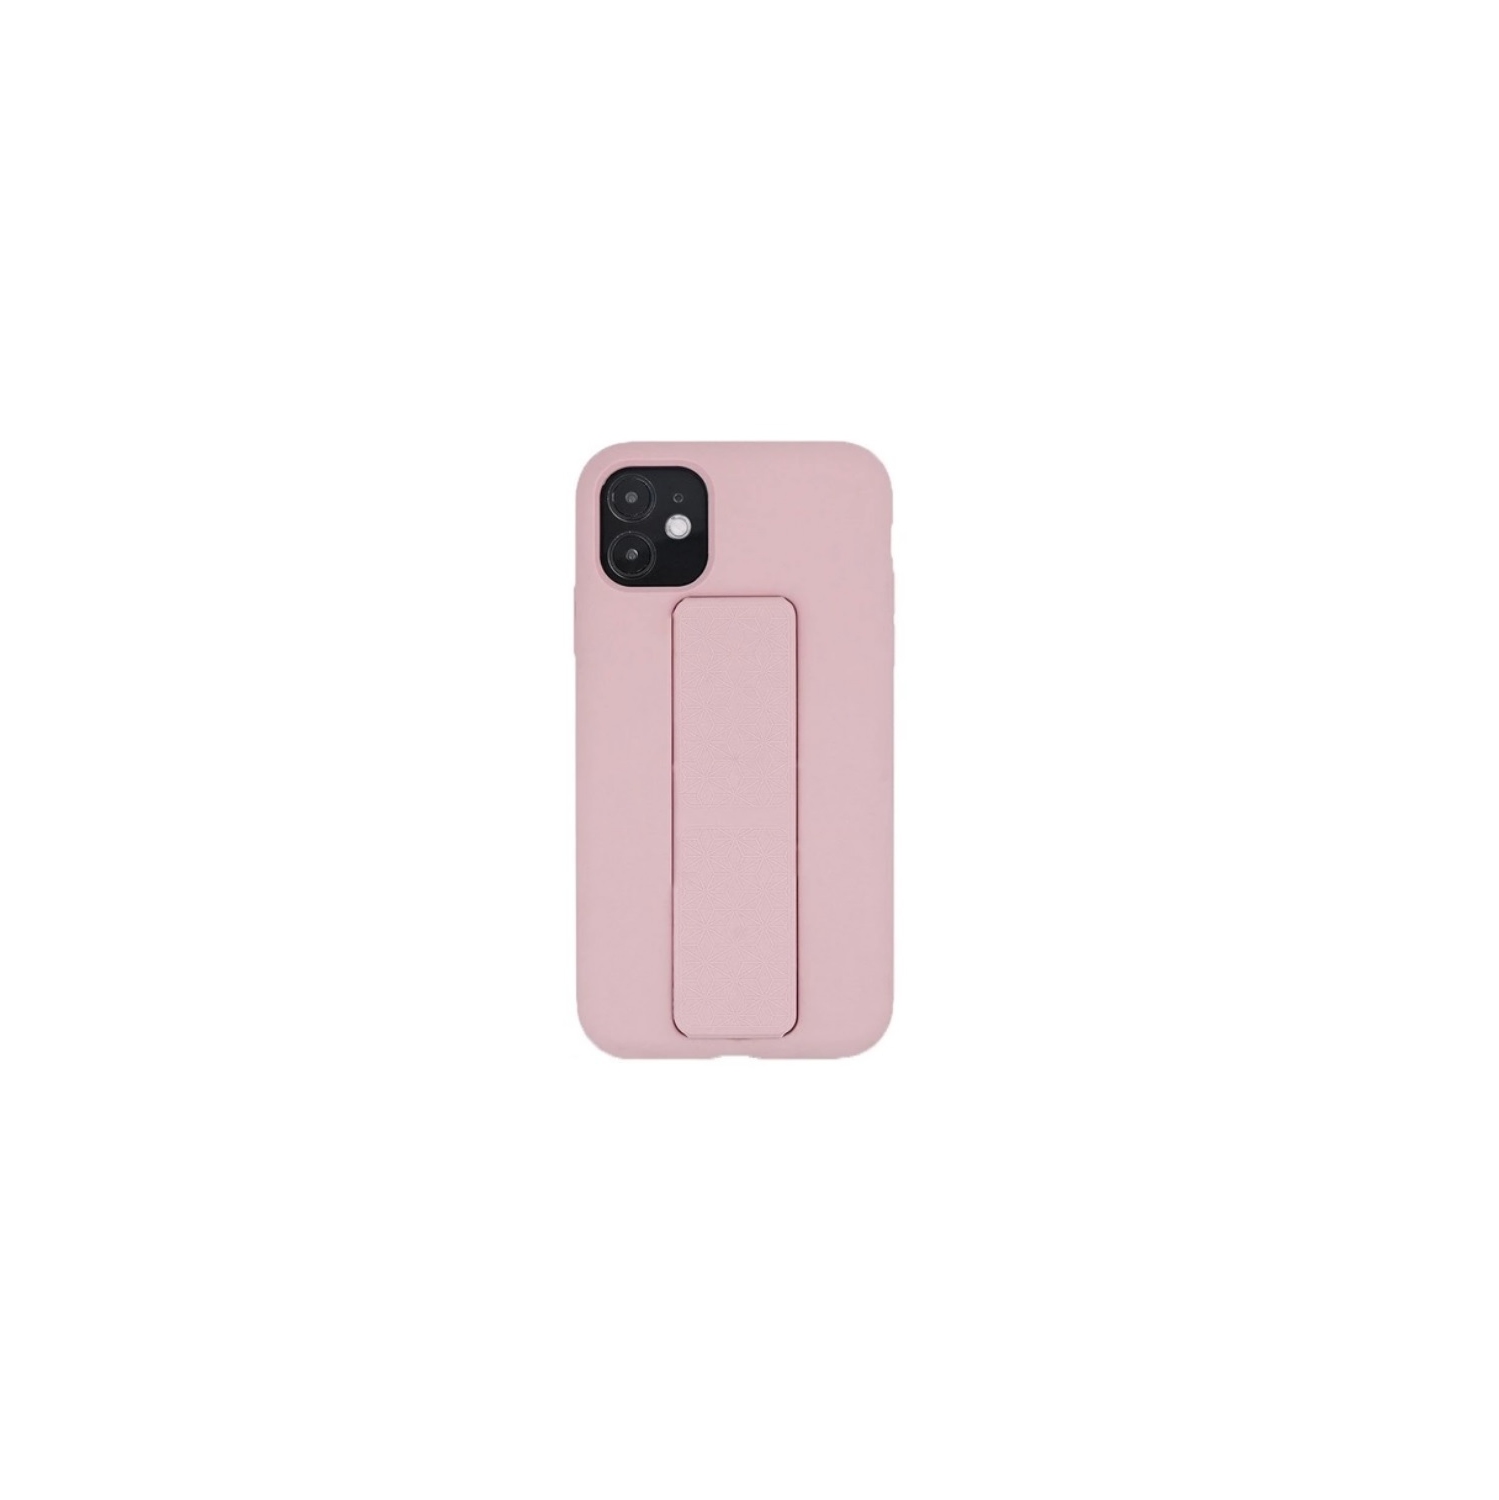 TopSave Silicone Case with Magnetic Stand and Thin Strap Case For Iphone 12 Mini, Pink Sand